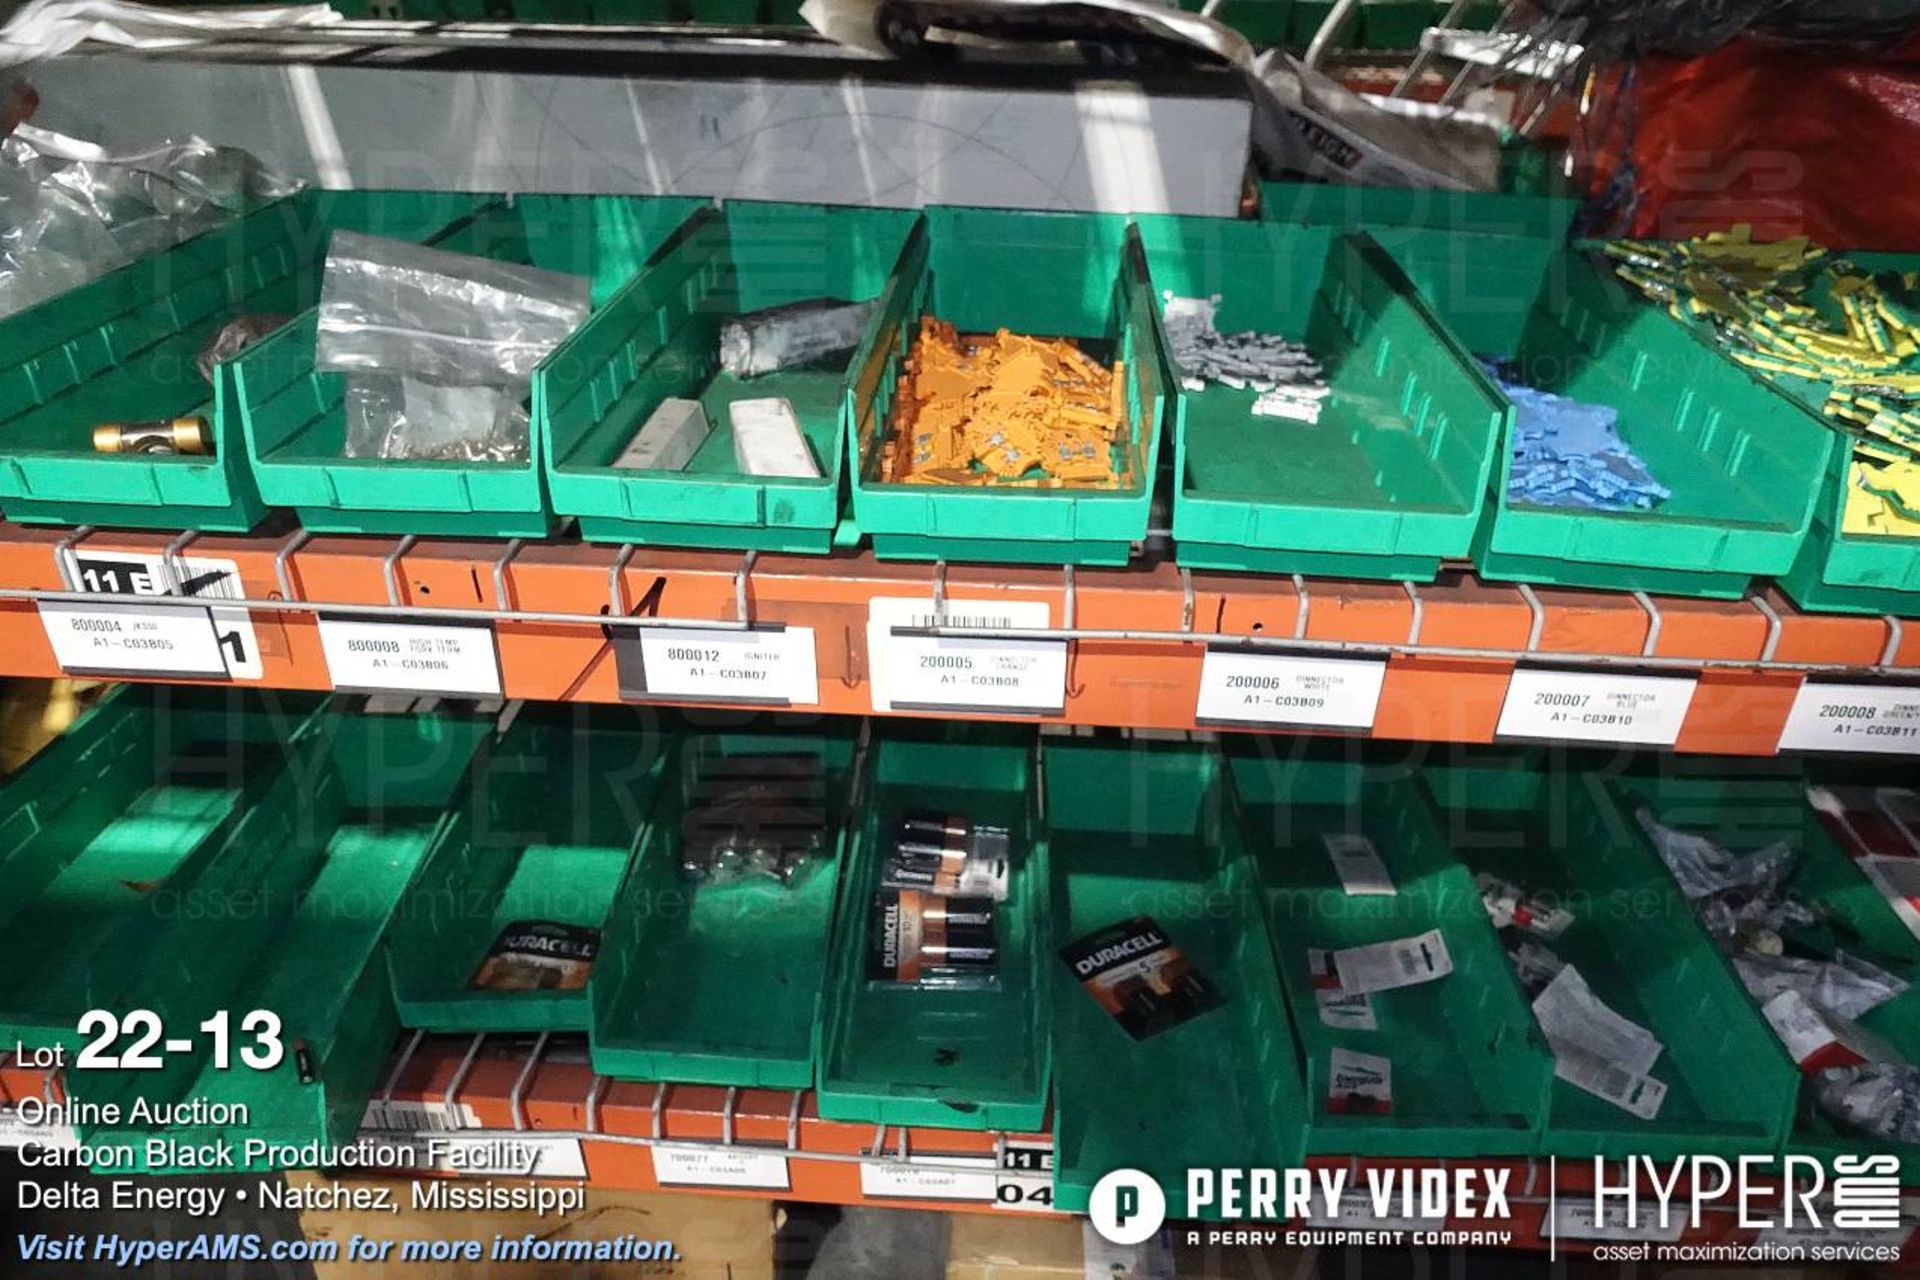 Contents Rack with Dodge bearings, fuses, pillow blocks, fittings, lubricants and more - Image 13 of 23